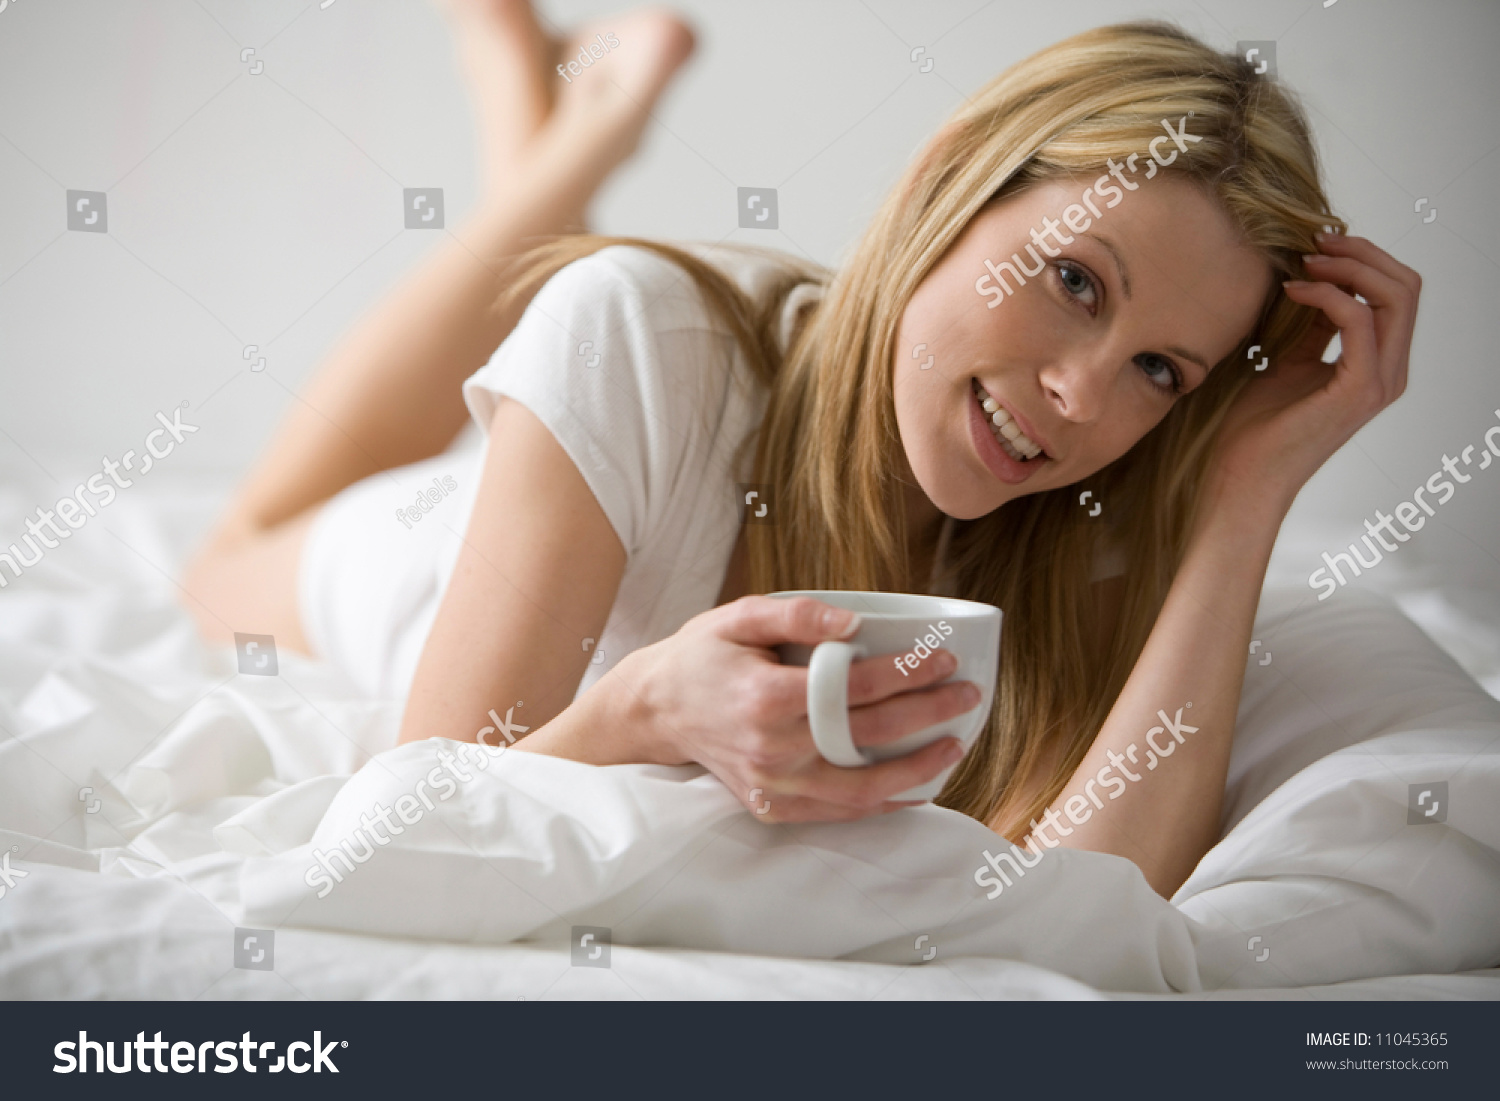 women, blonde, in bed, ass, long hair, lying on front, Kim 